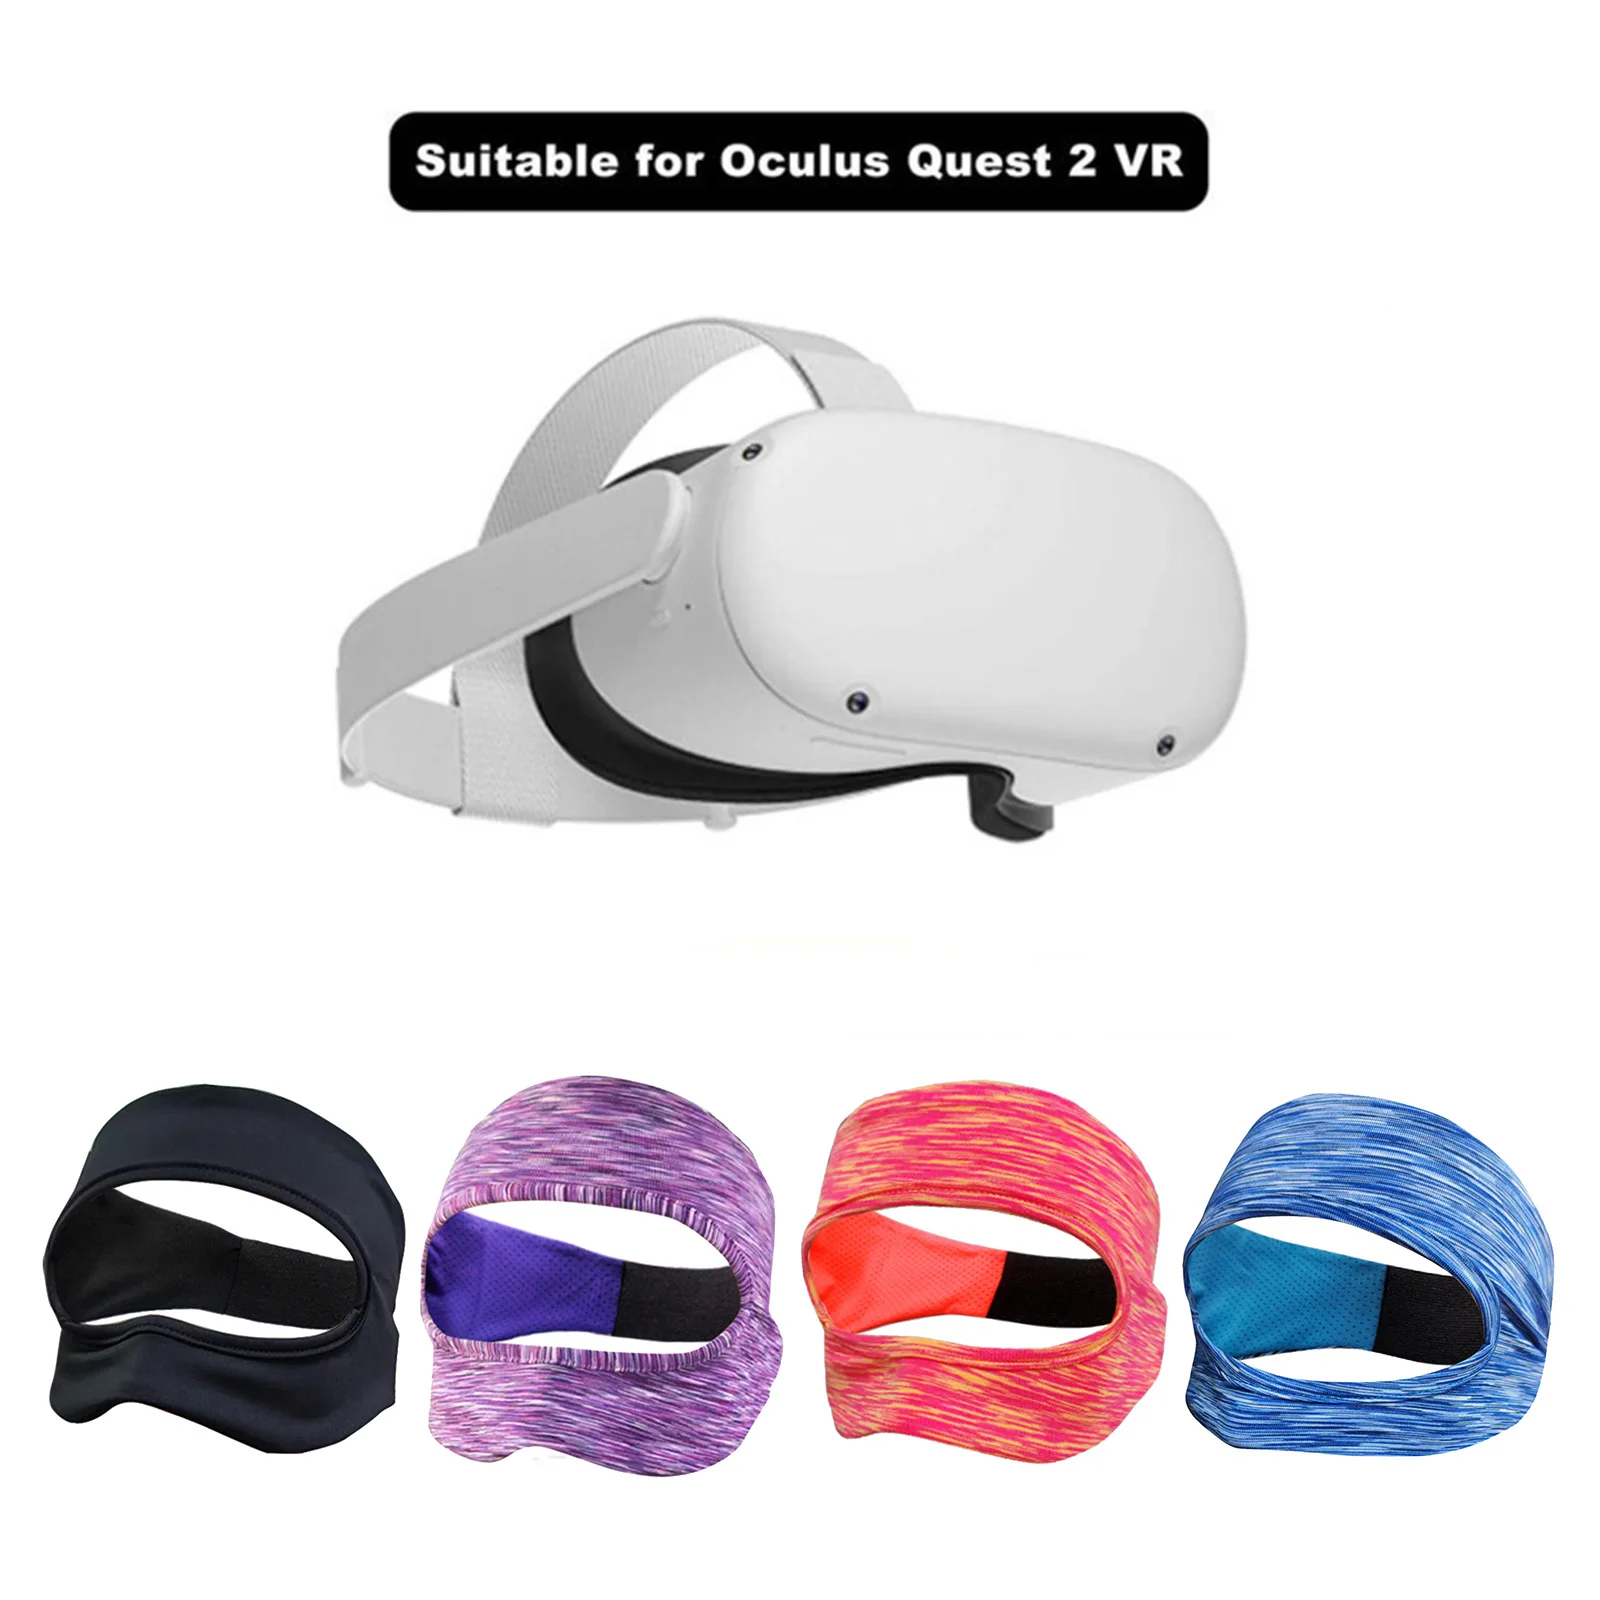 Vr Eye Mask Cover Breathable Sweat Band Adjustable Sizes Padding With Virtual Reality Headsets For 1 - Vr/ar Glasses Accessories - AliExpress